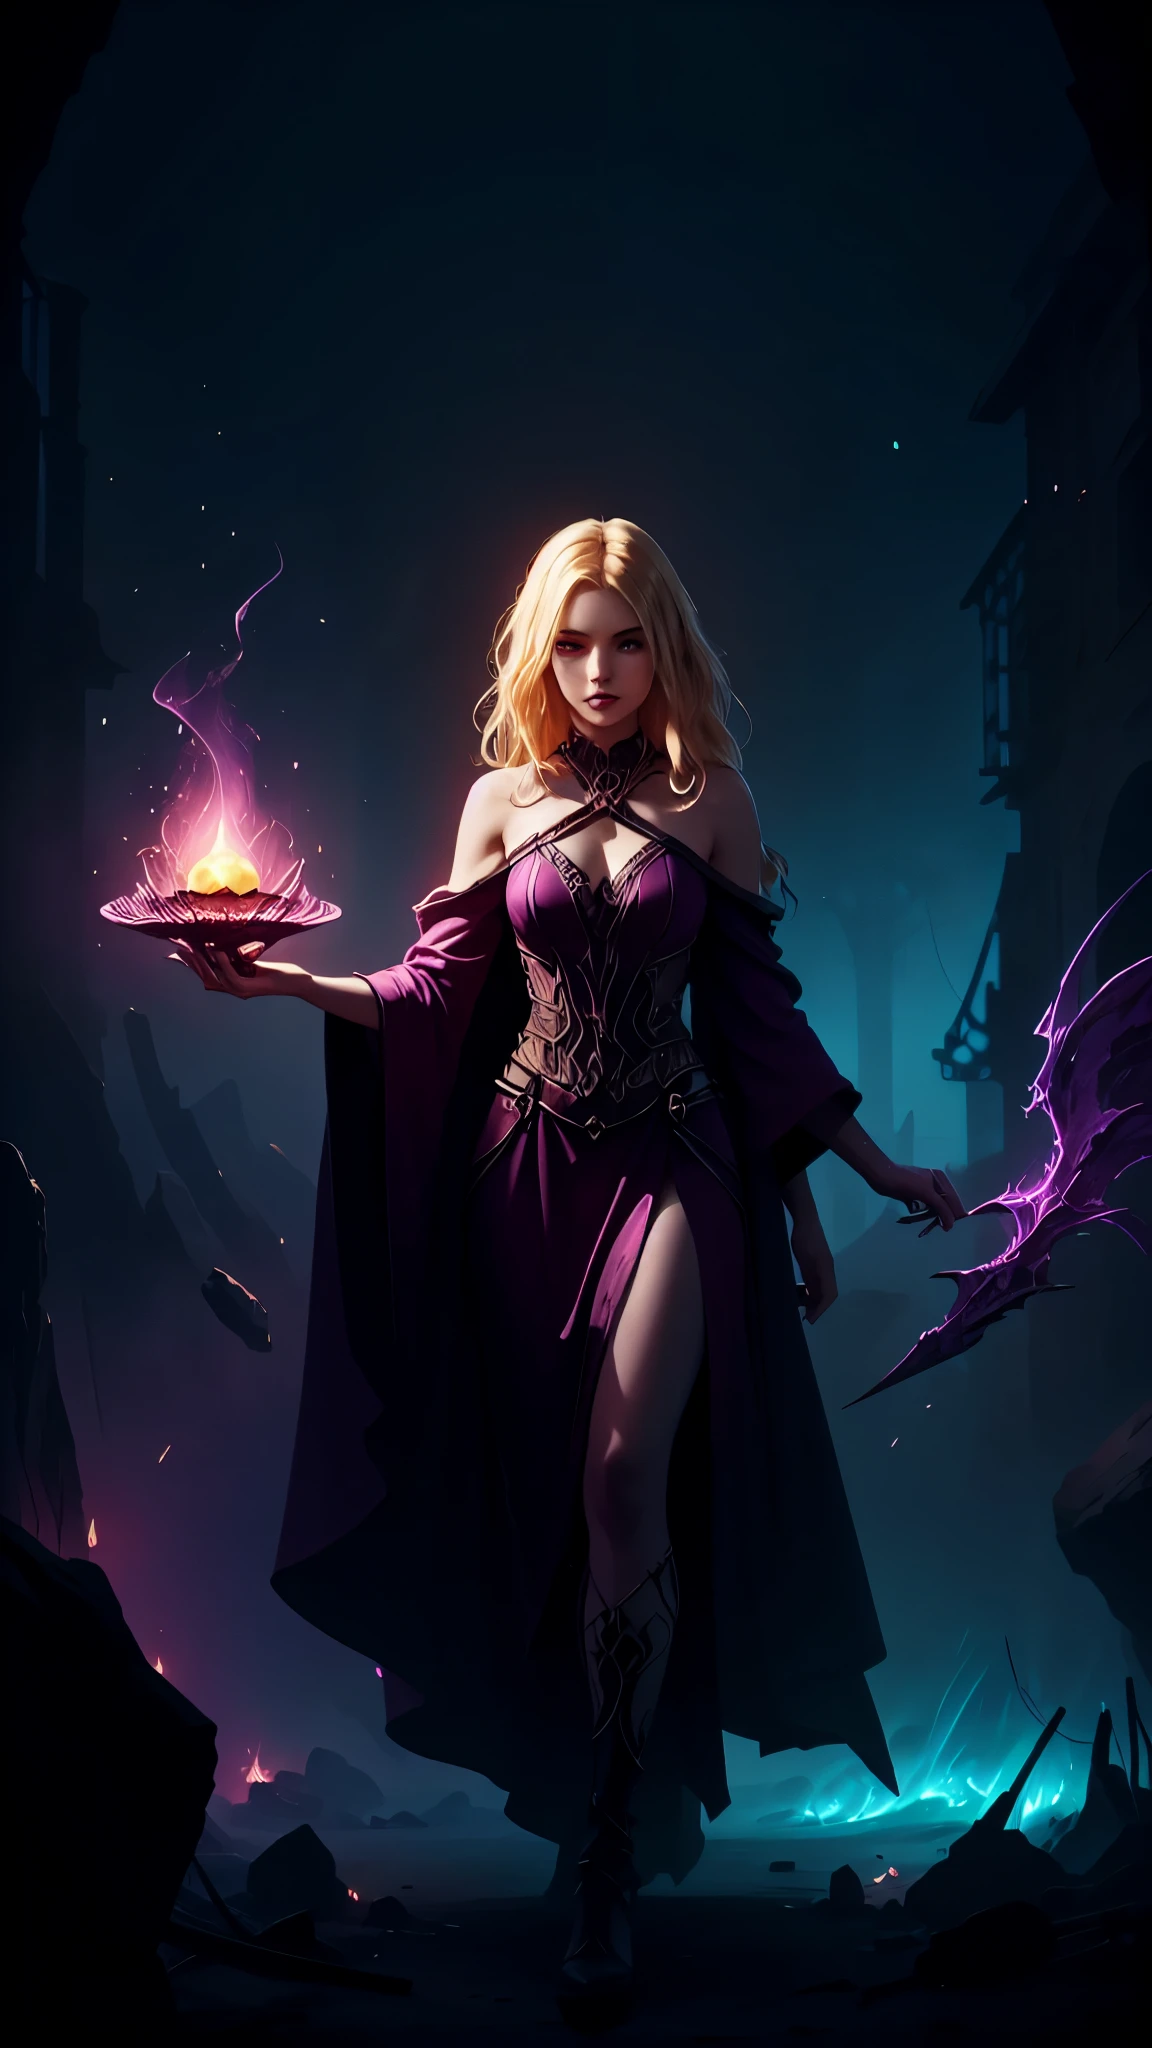 In this mesmerizing digital painting, a magenta-hued mauve-tinted ethereal swirling ethereal energies in dark digital brushstrokes highlights a female necromancer that materializes with an enigmatic presence. The image, rendered with stunning clarity and intricate details, showcases the necromancer surrounded by her captured spirits essence shown in dying embers of light trying to get away from her presence .( The necromancer's amber and teal colored robes, adorned with intricate patterns and shimmering runes, evoke a sense of arcane power). With piercing violet eyes that seem to peer into the depths of one's soul, ((the necromancer's pale and flawless complexion and blonde hair is juxtaposed with a touch of eerie luminescence)). This masterful artwork captures the mystique and allure of necromancy arts, drawing viewers into a world where magic and darkness intertwine.